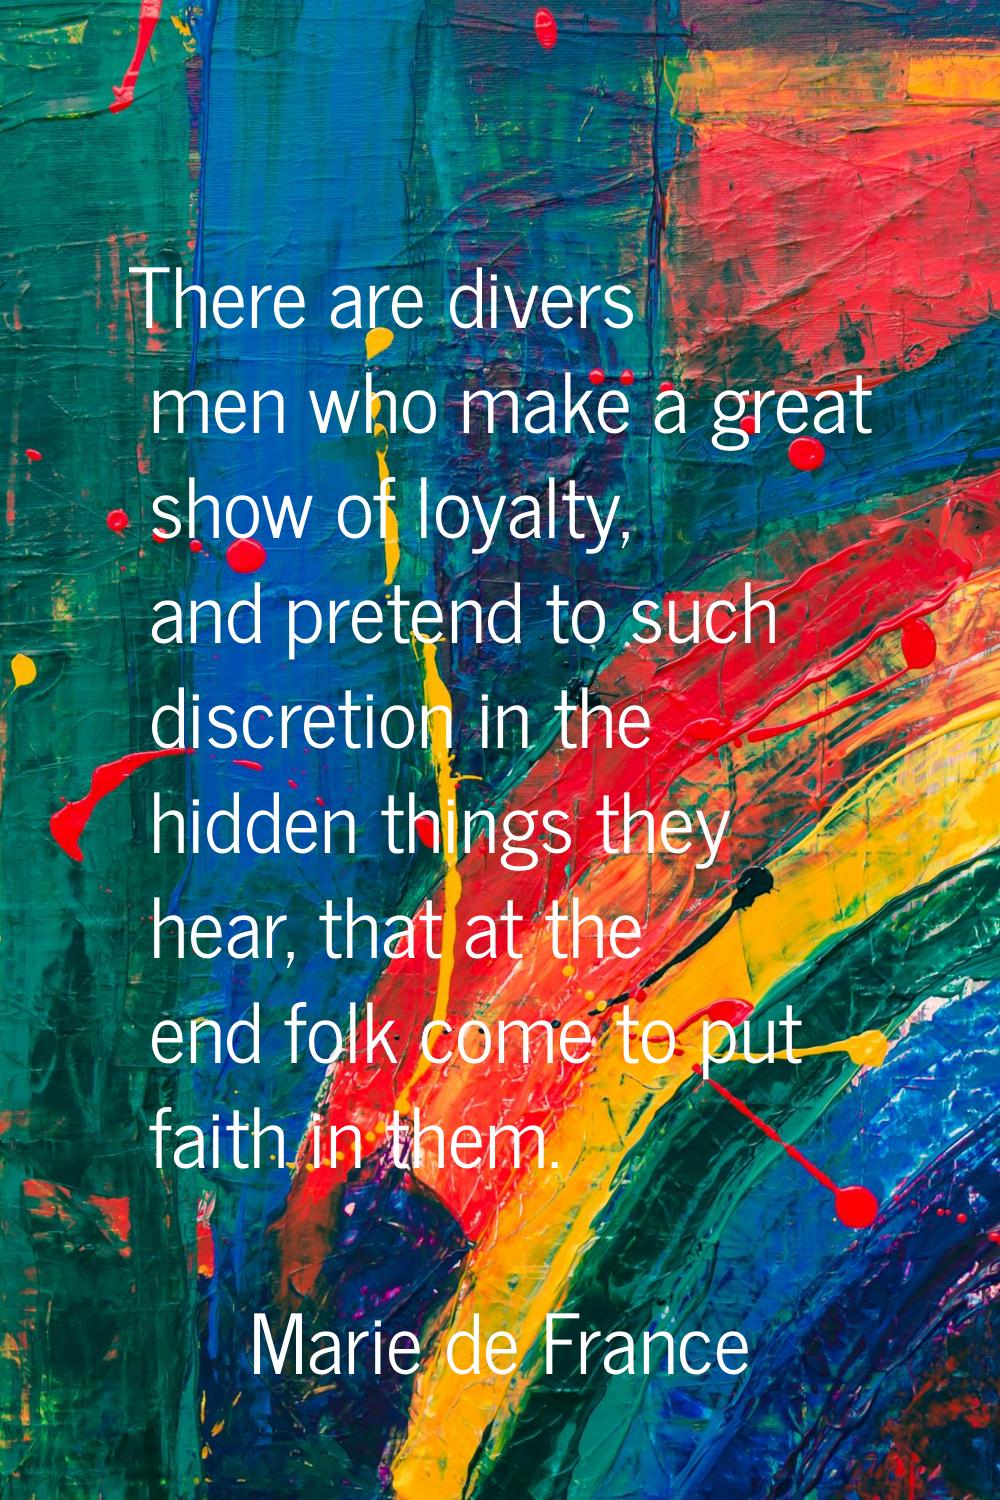 There are divers men who make a great show of loyalty, and pretend to such discretion in the hidden